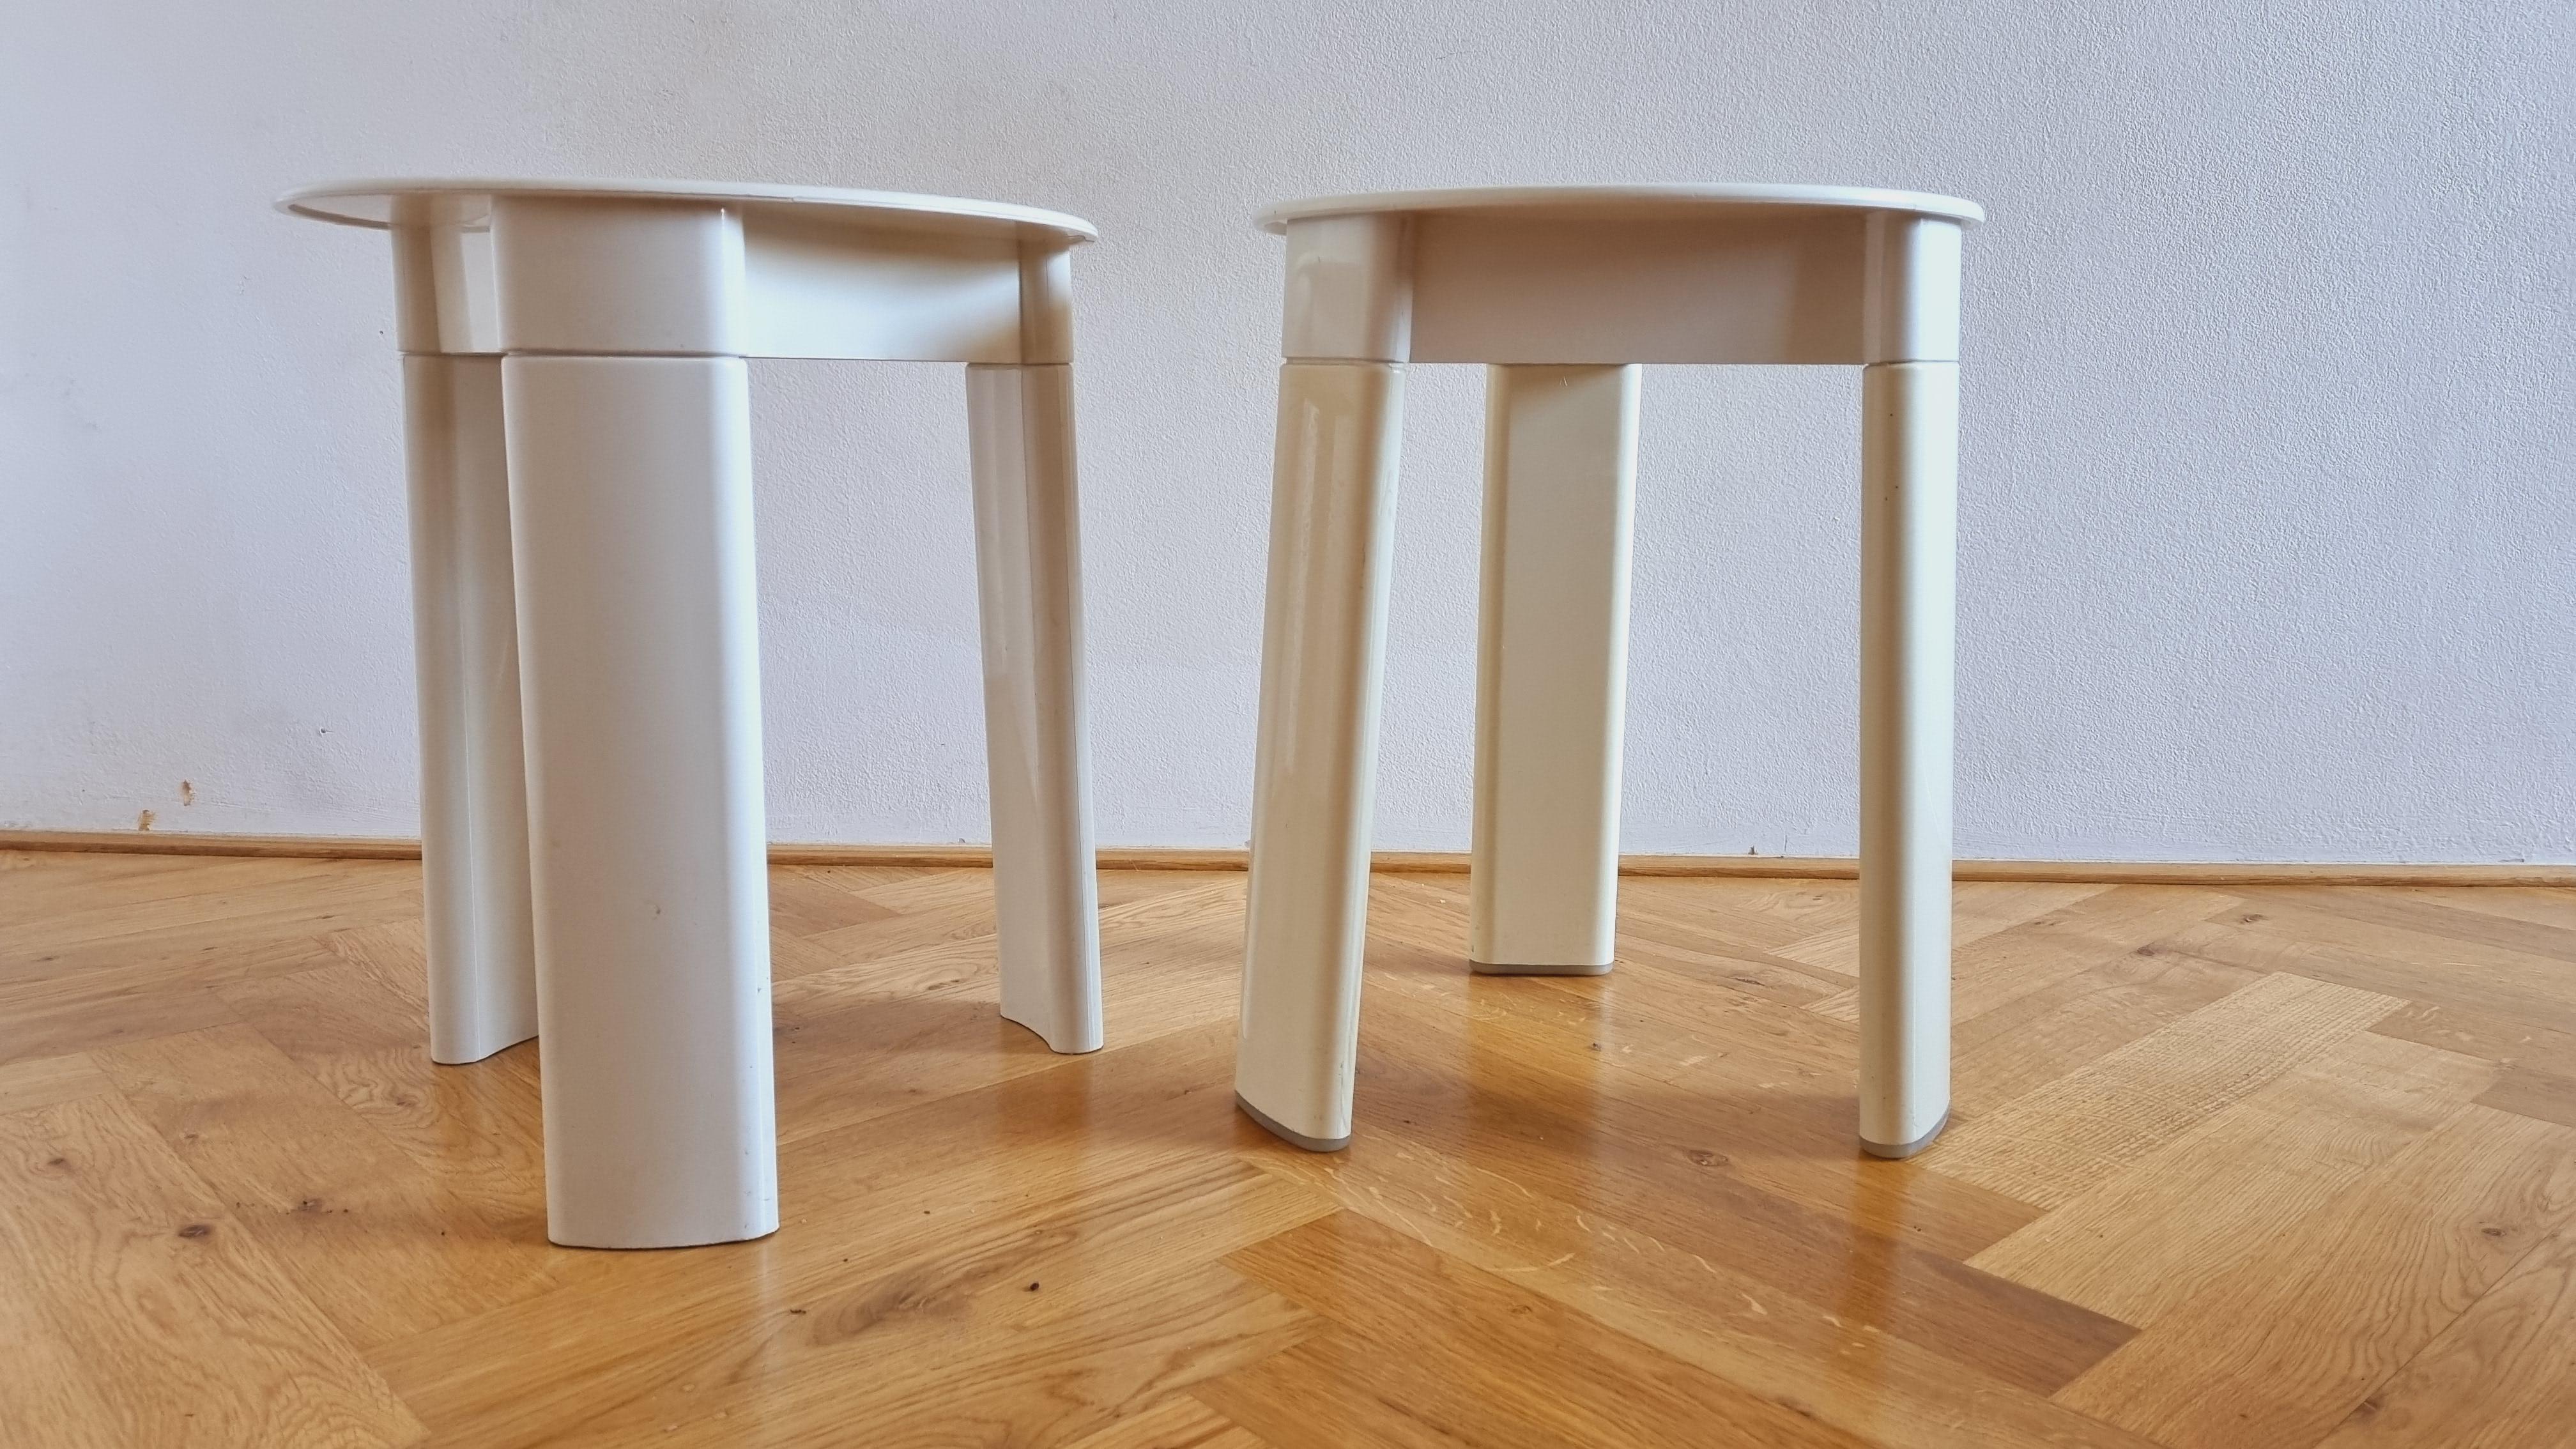 Italian Pair of Midcentury Stools or Side Tables Trio, Olaf Von Bohr, Gedy, Italy, 1970s For Sale